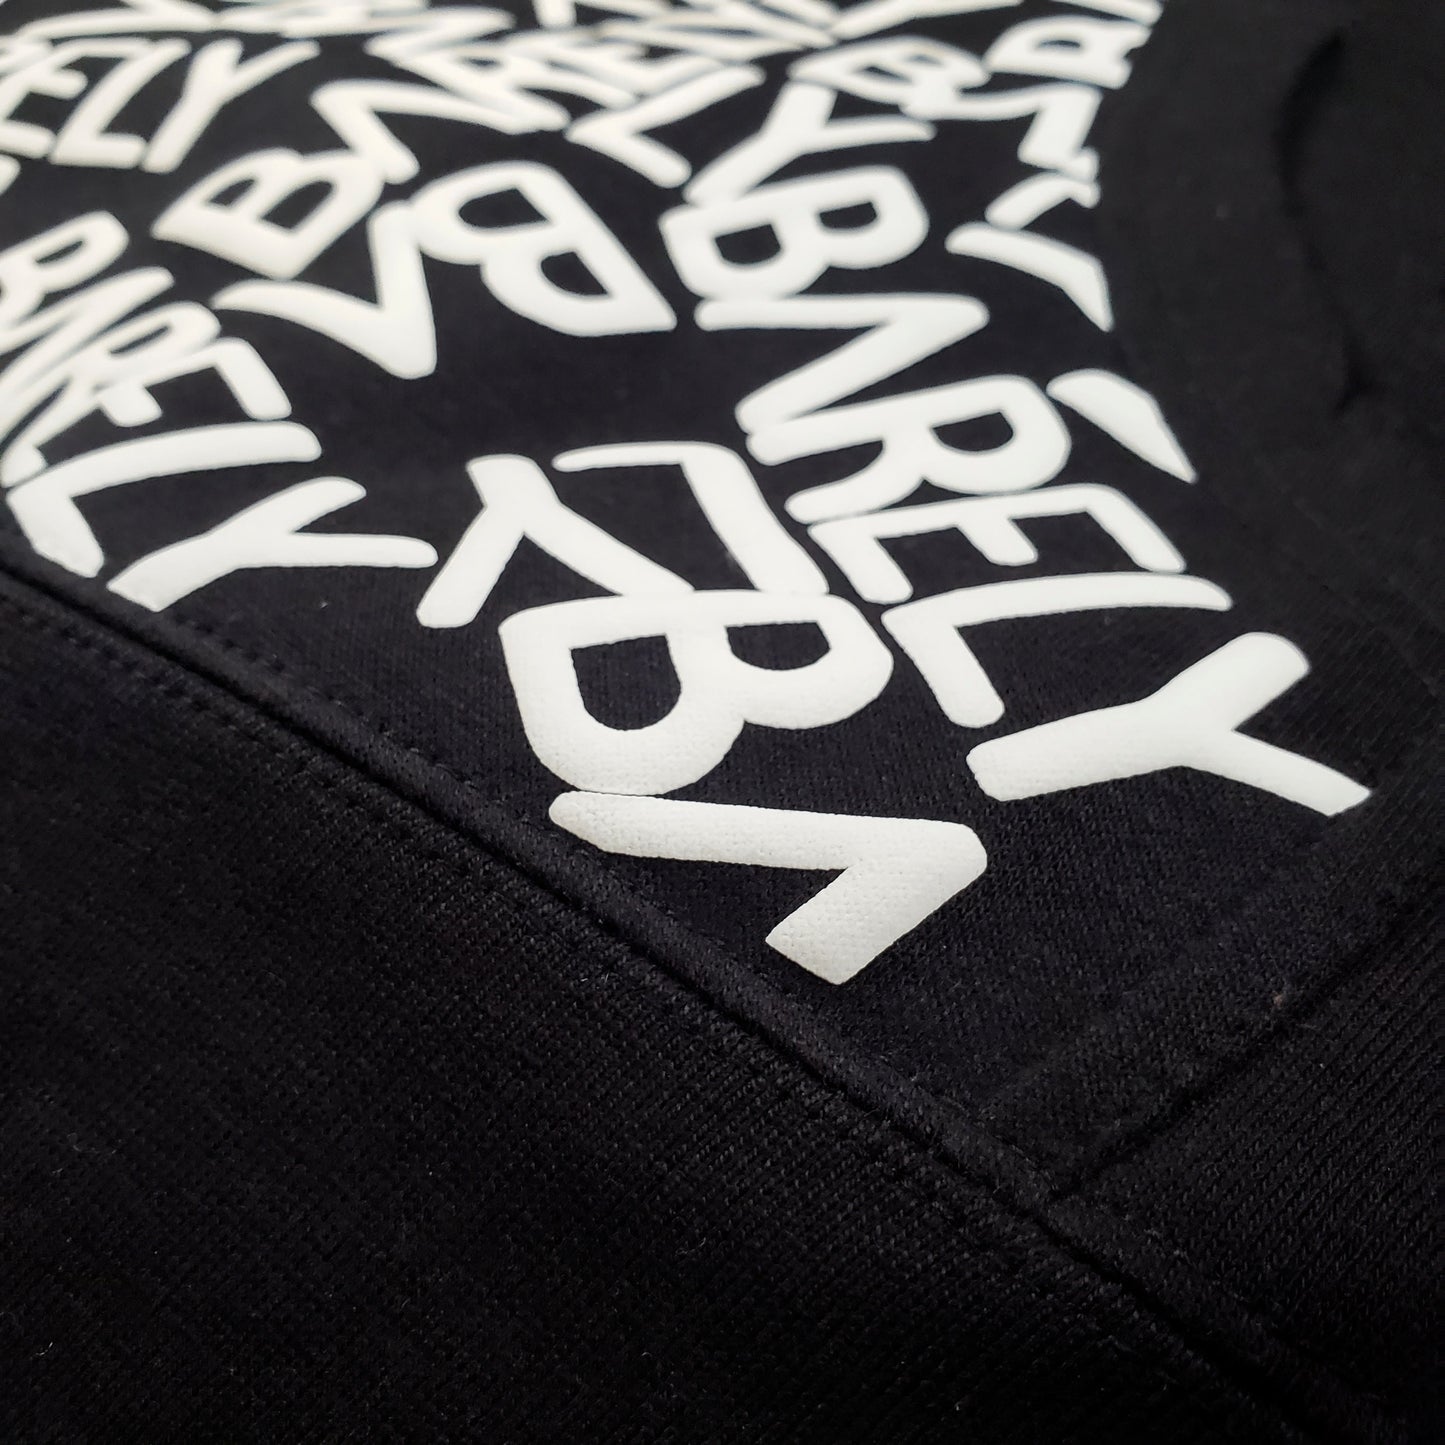 Barely "Scrabble Logo" Hoodie (Blk/Wht) - Barely Ordinary